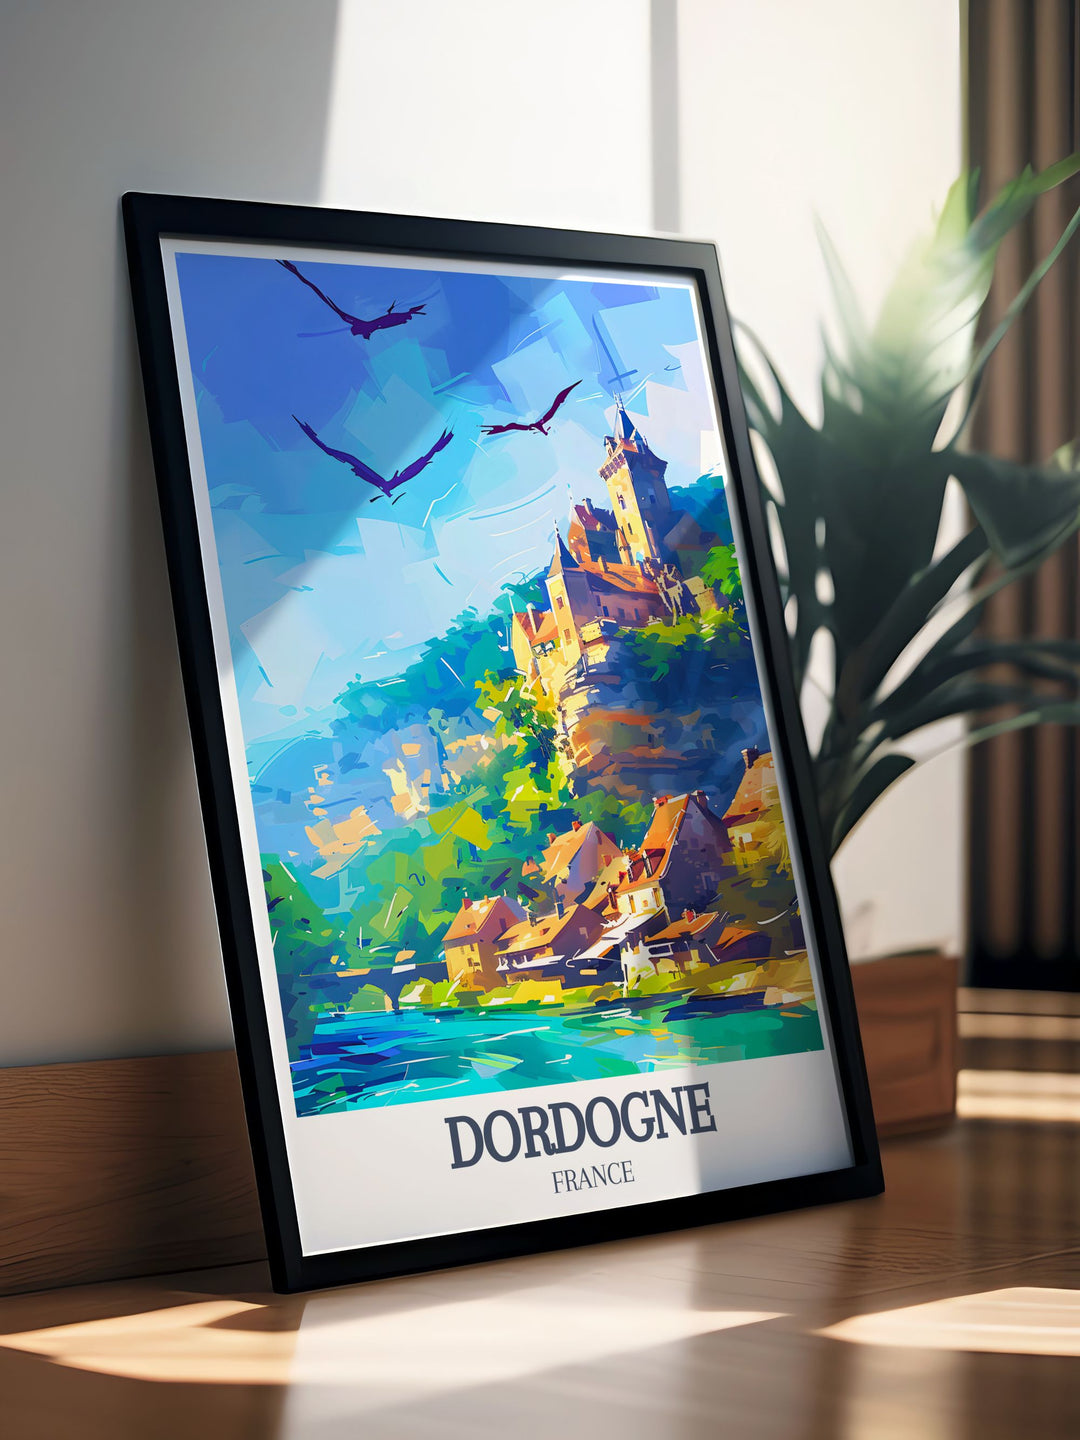 Dordogne wall art featuring the magnificent Chateau de Beynac and the charming village of La Roque Gageac an exquisite addition to any France home decor collection